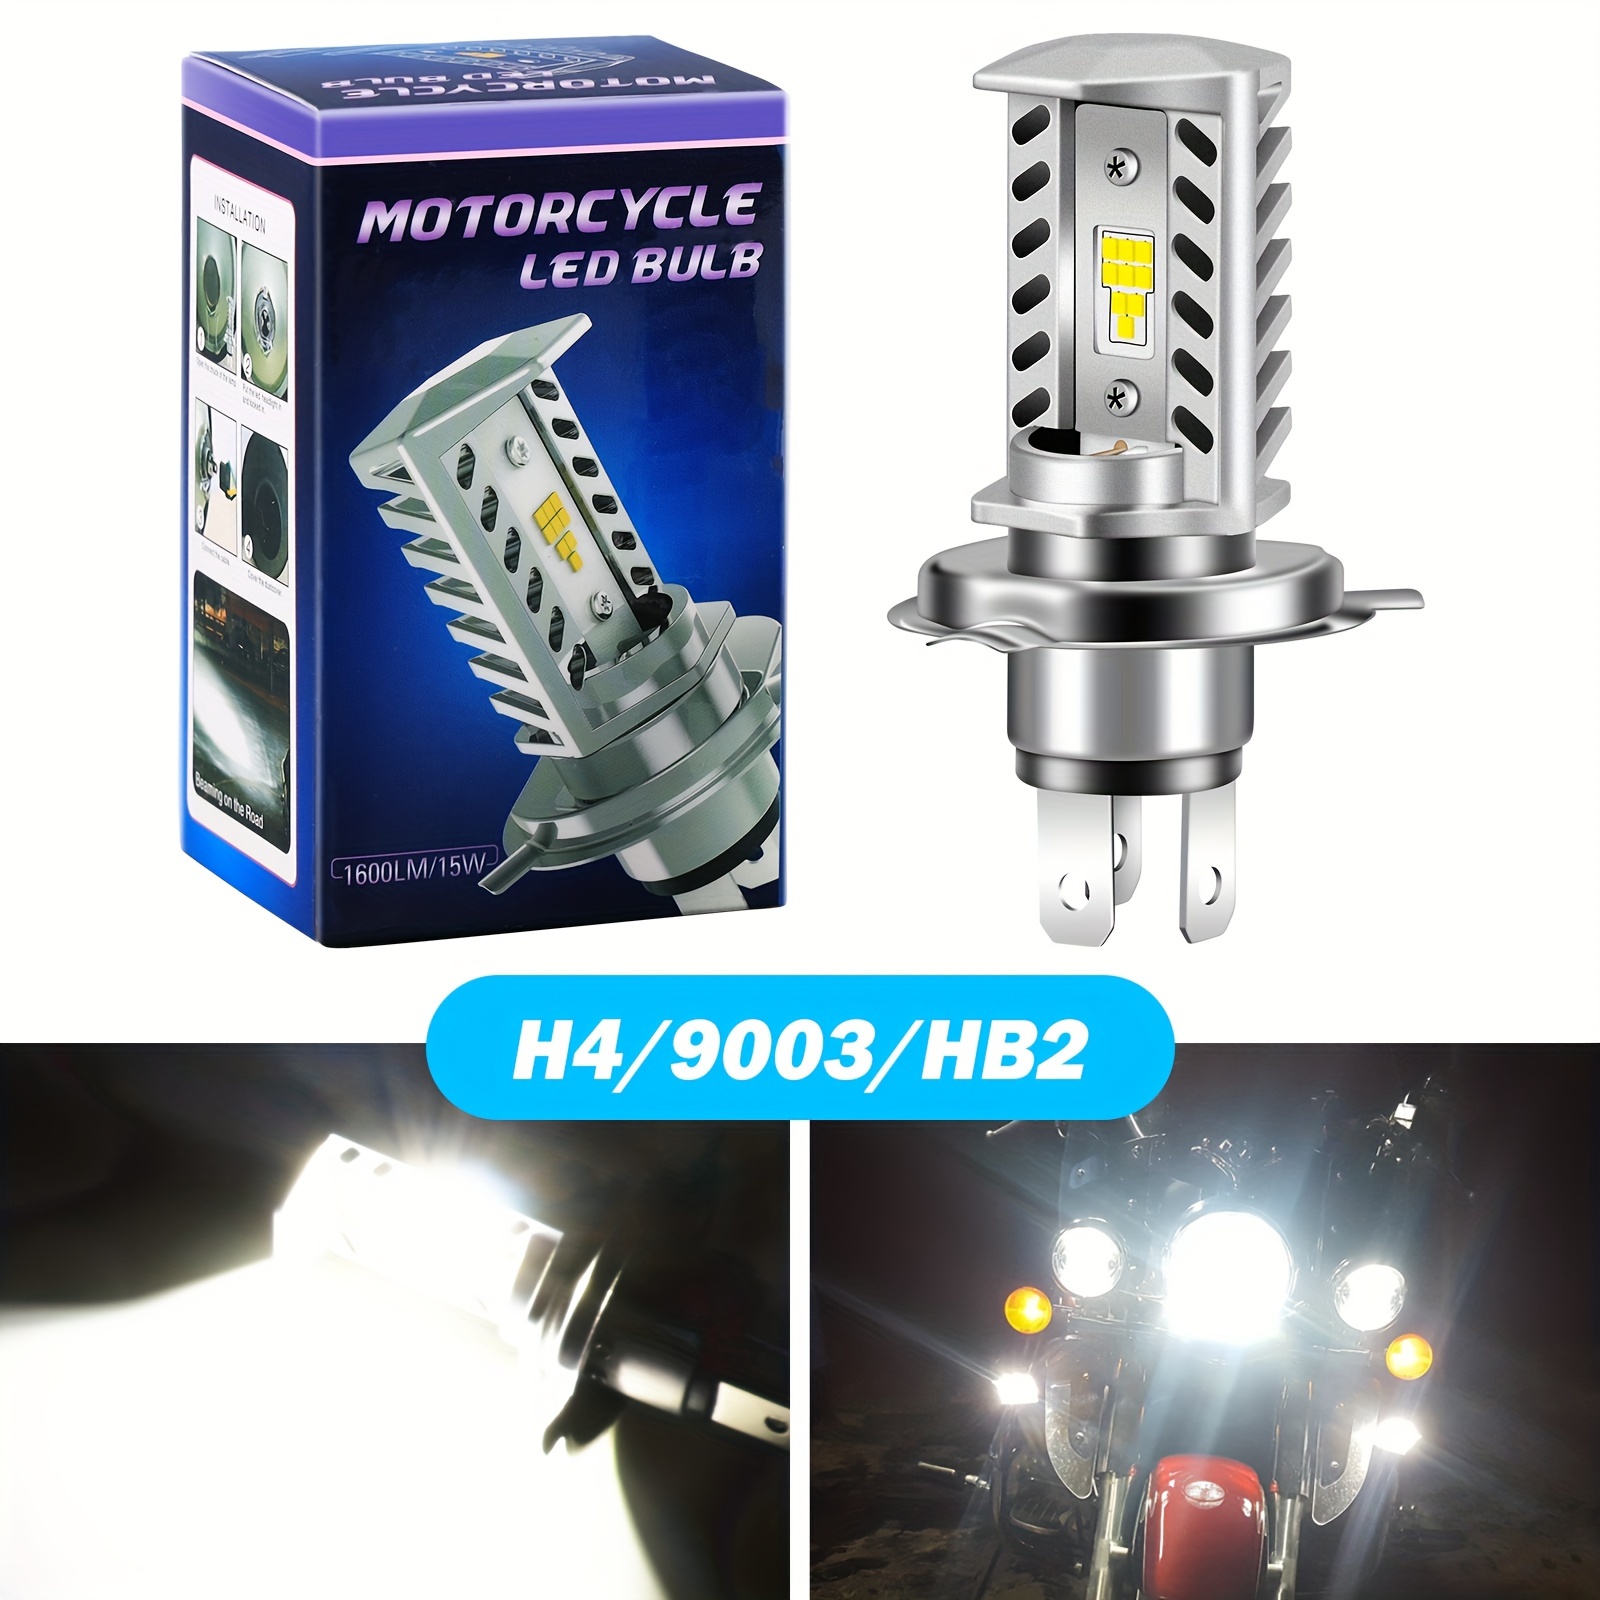 

1pcs H4 9003 Hb2 Led Motorcycle Headlight Bulbs, 15w 1600lm 300% Brightness 6500k White With Canbus High/low Beam Plug And Play Dc9-32v